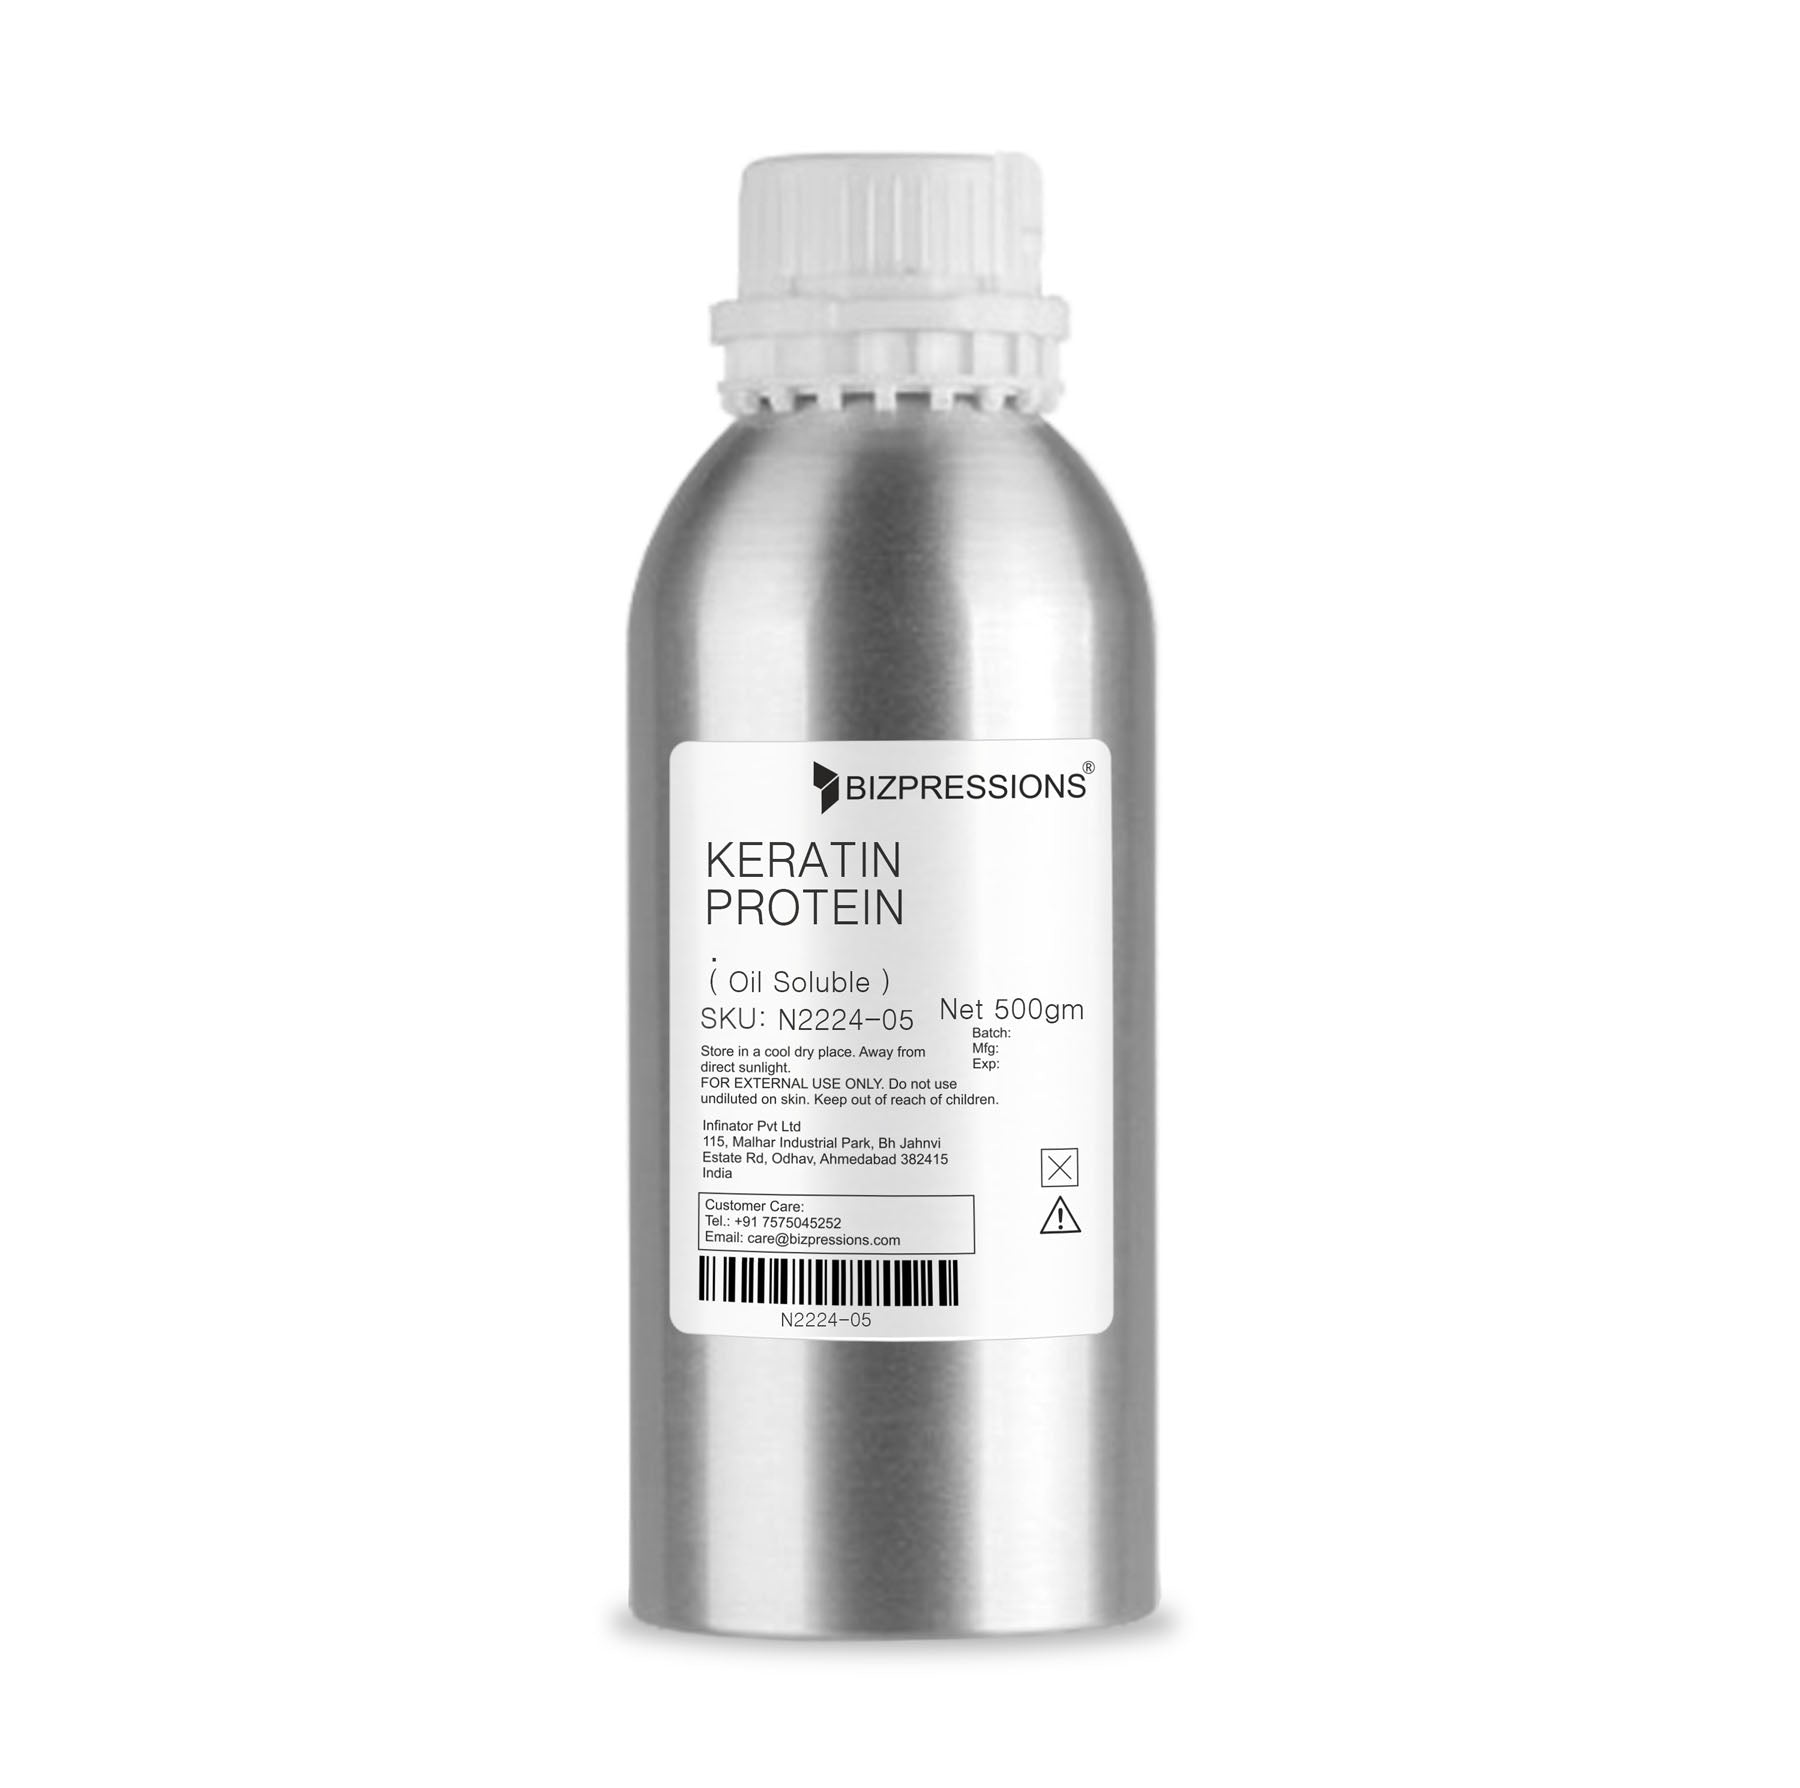 KERATIN PROTEIN - Fragrance ( Oil Soluble ) - 500 gm